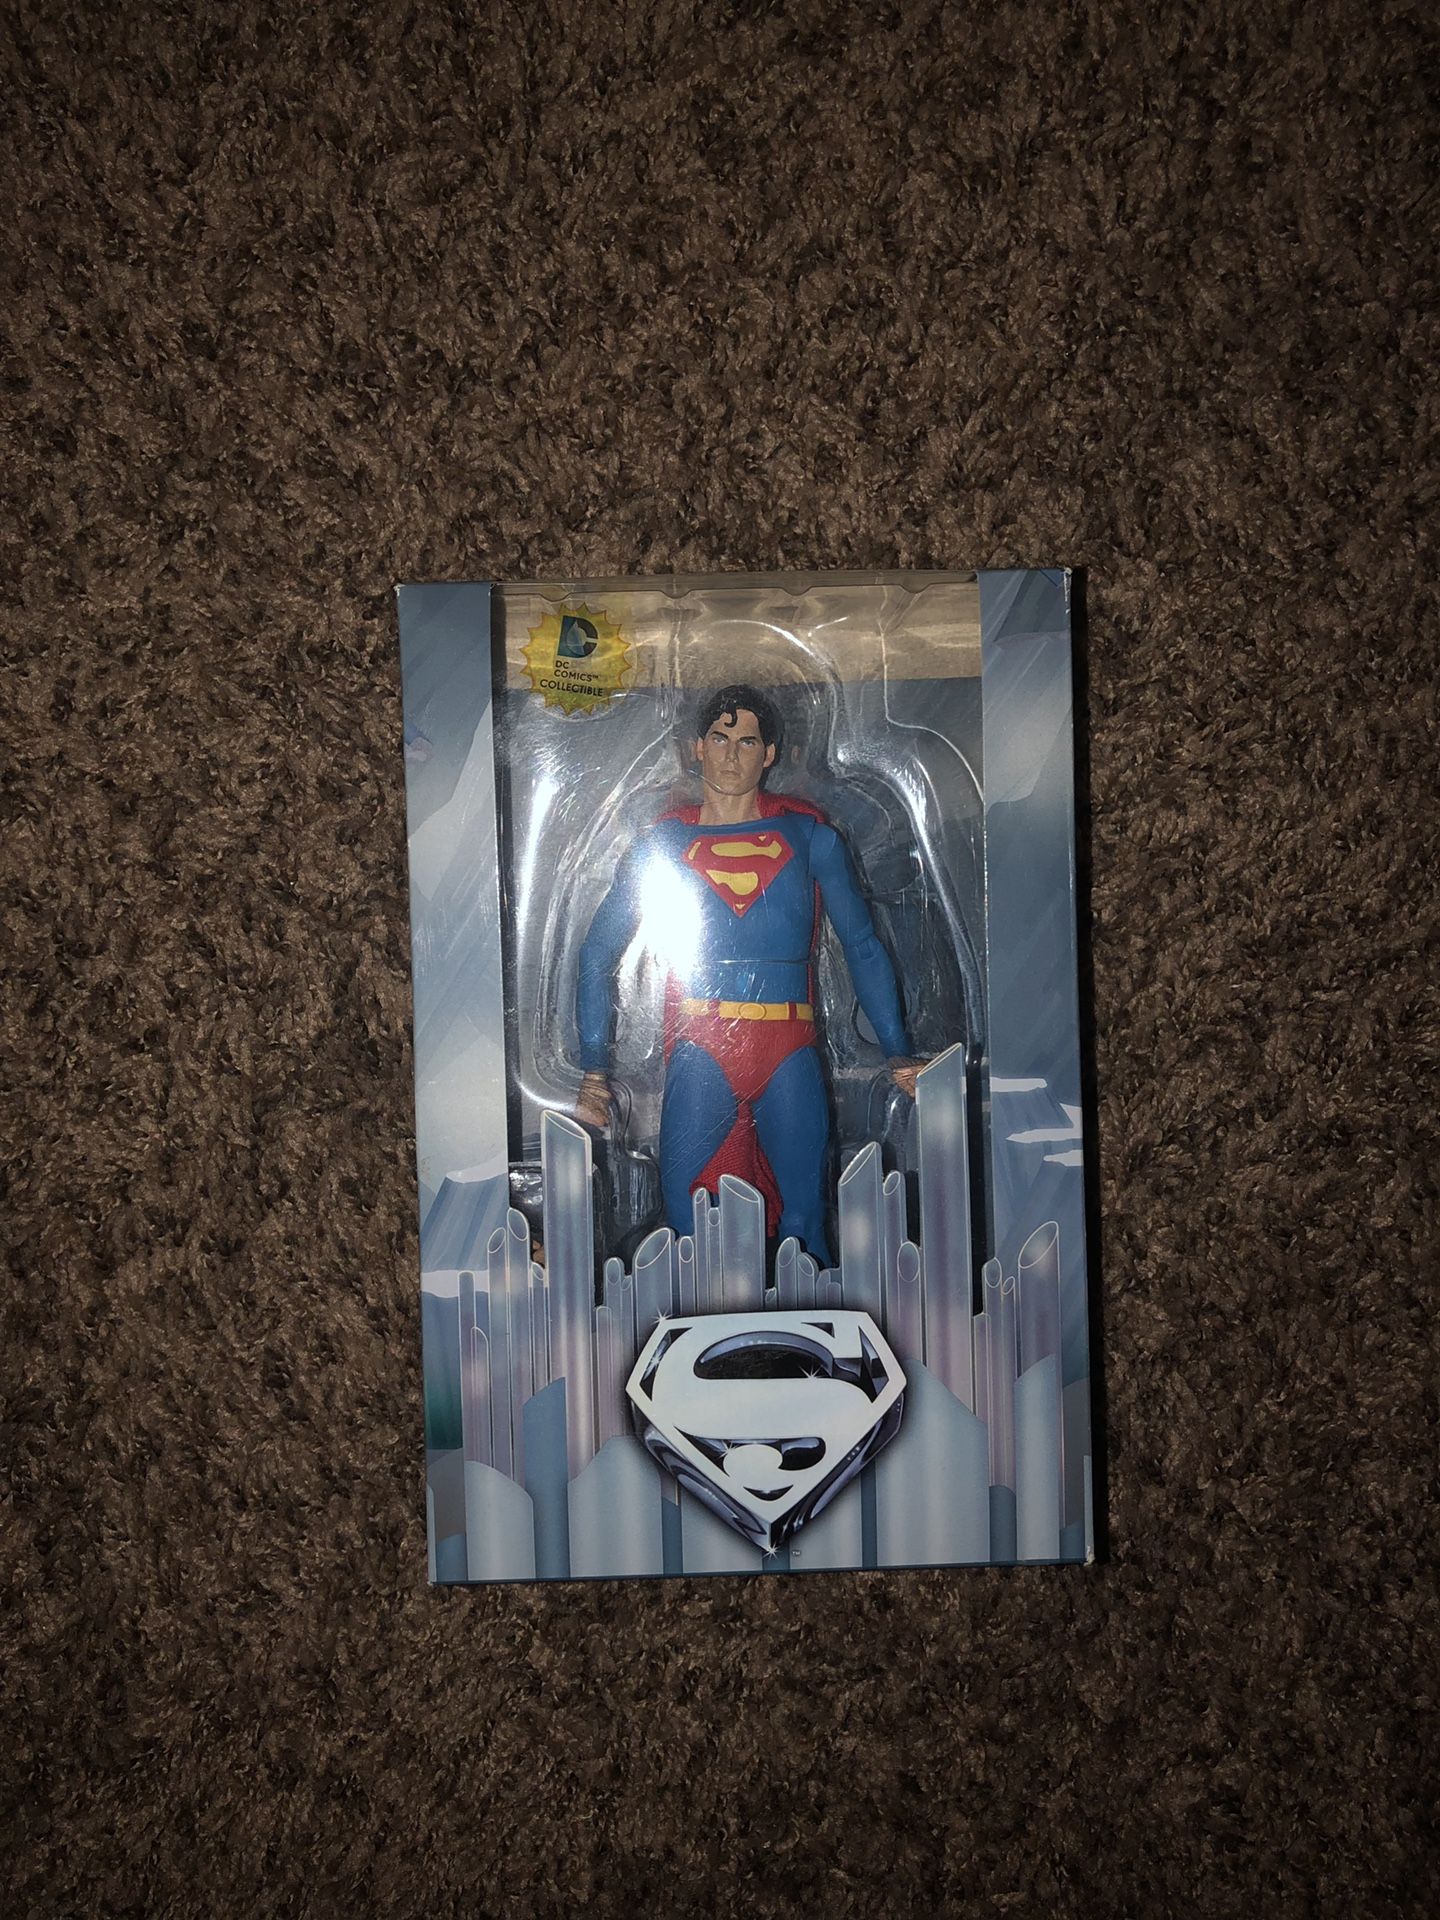 Neca Superman action figure brand new toys r us Exclusive